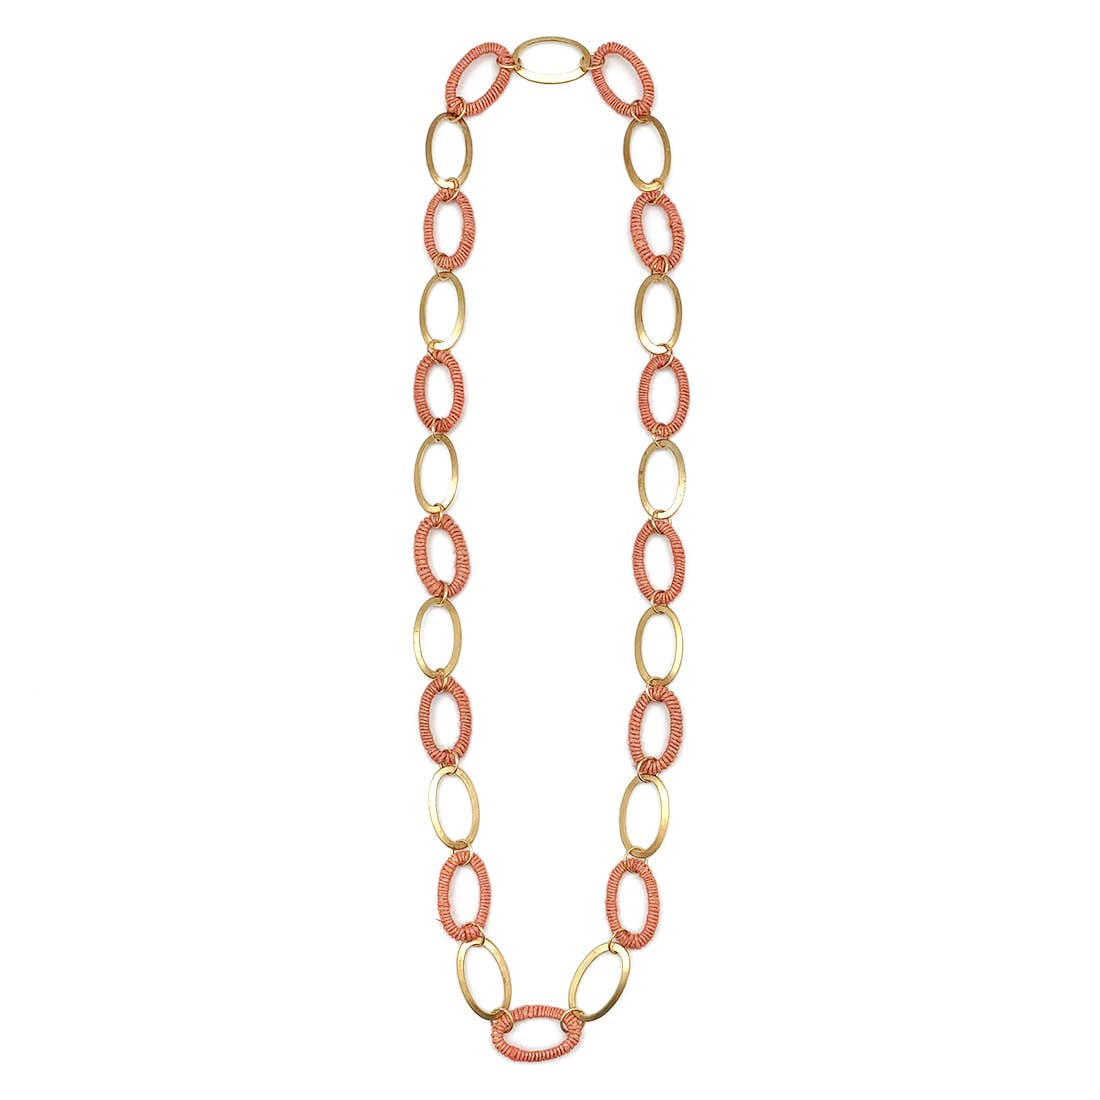 Sachi Terracotta Collection Necklace - Allover Wide Links